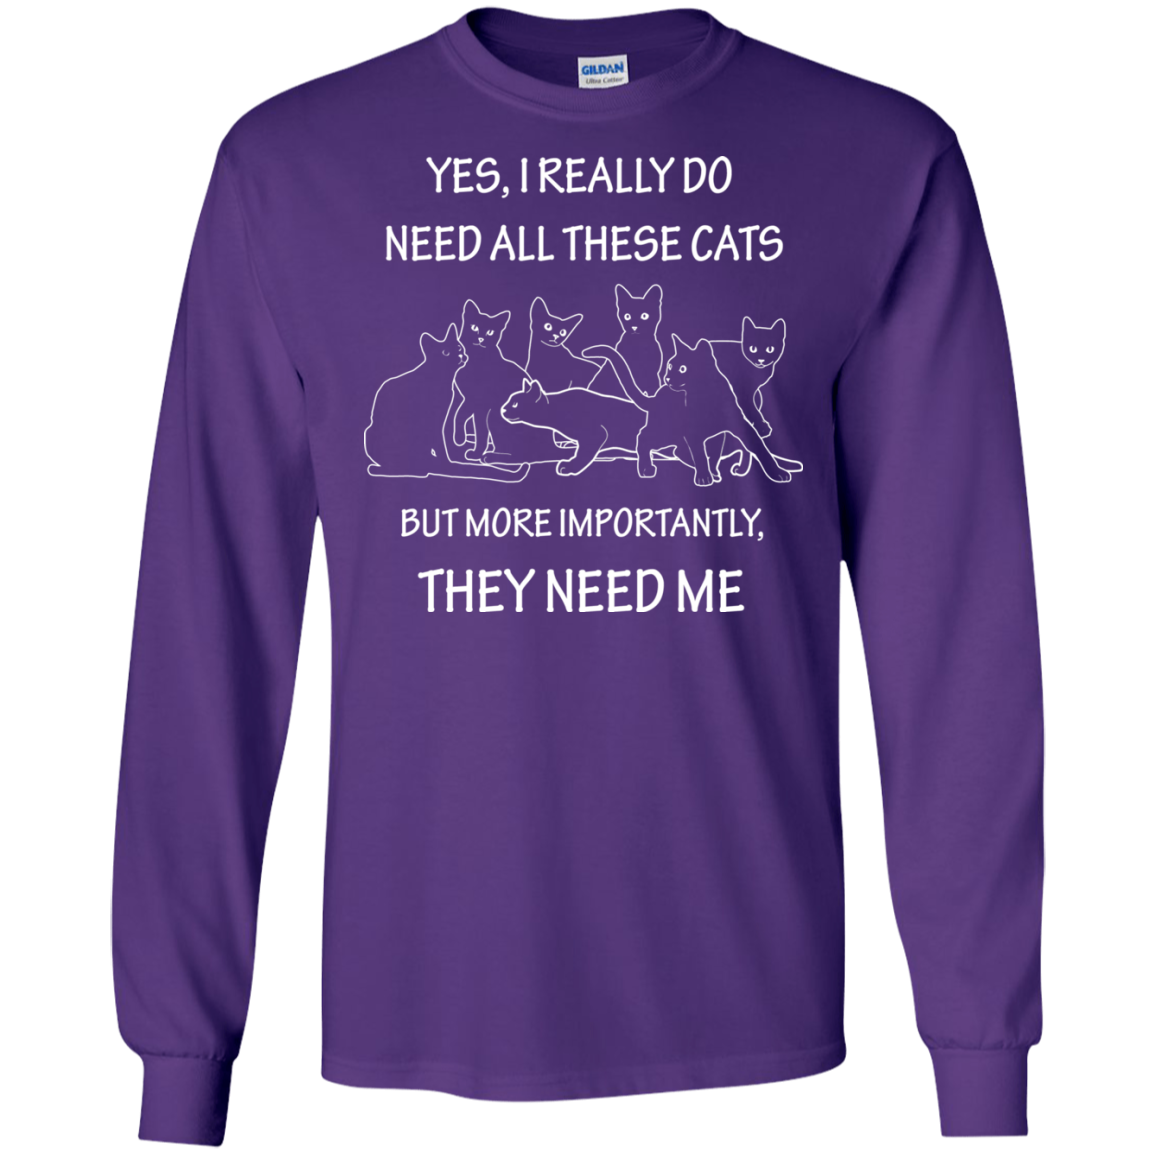 They Need Me LS Ultra Cotton T-Shirt